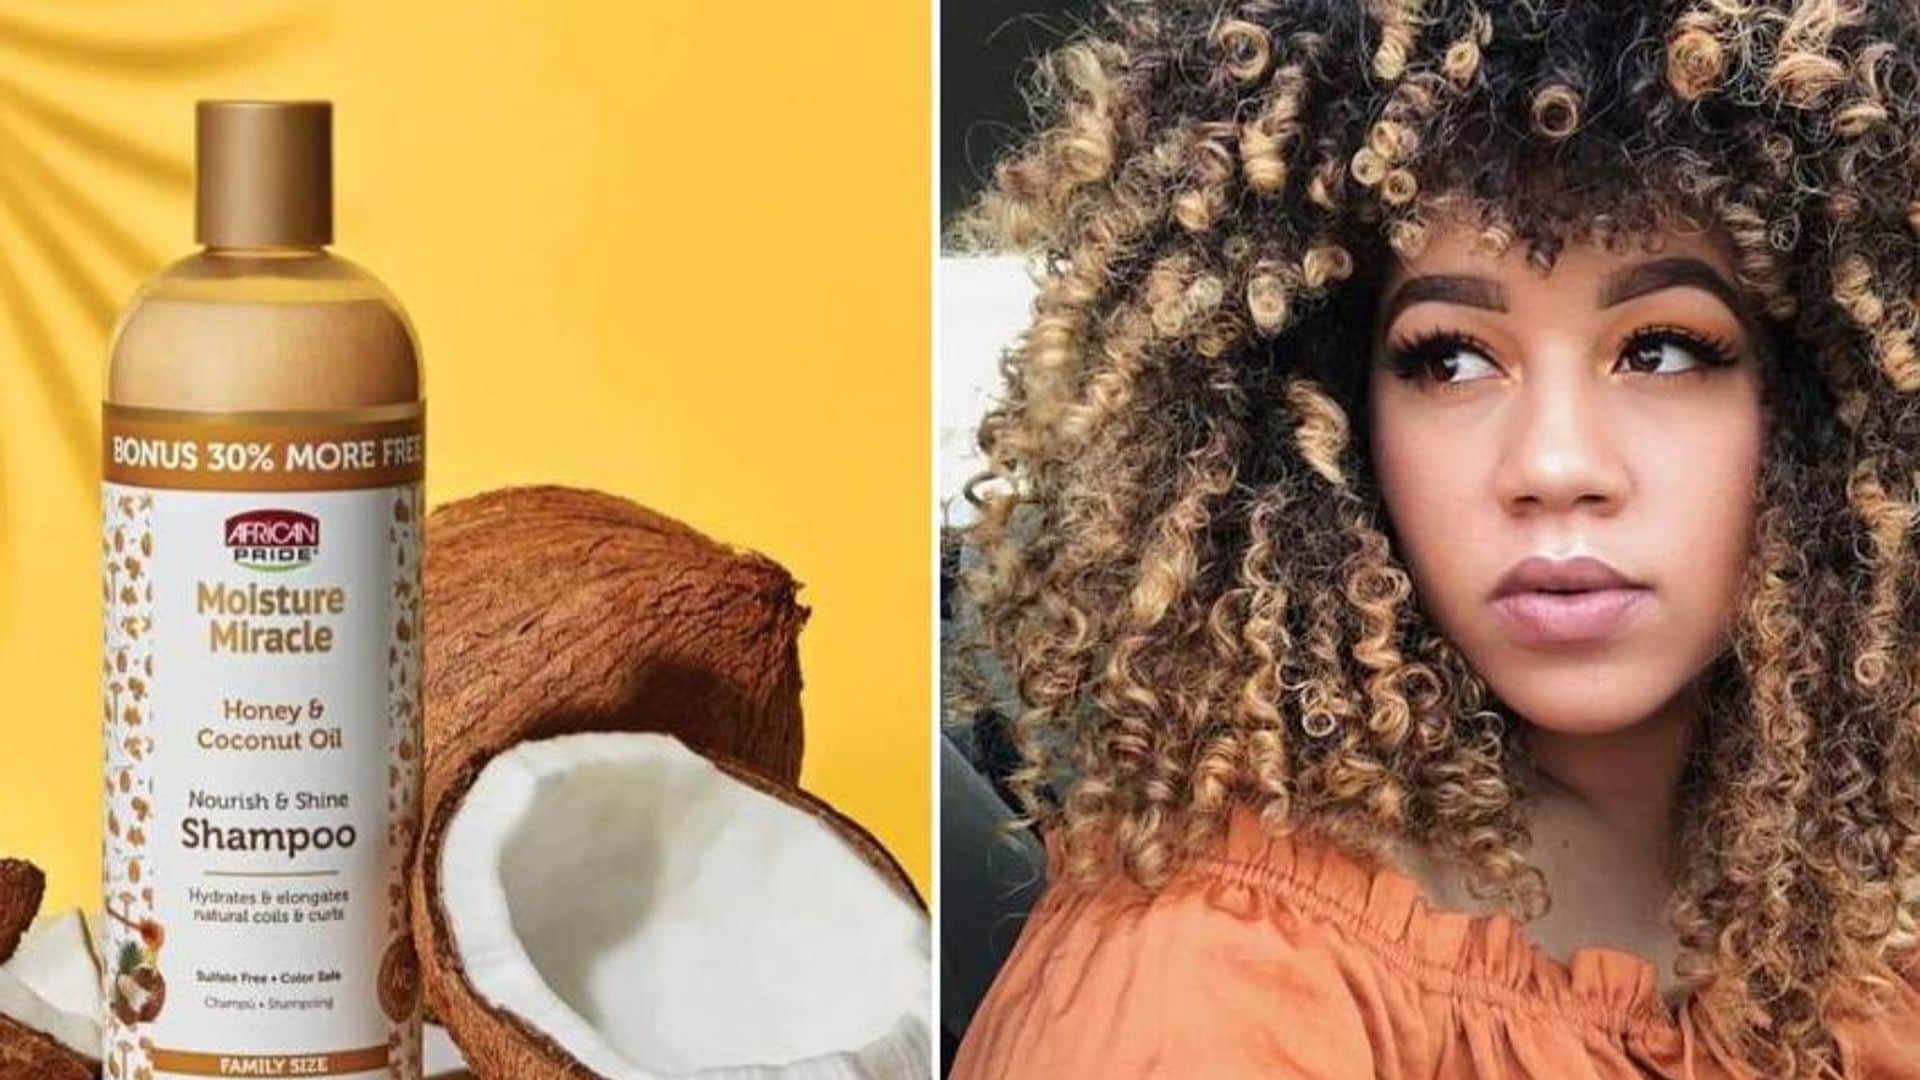 Curly hair hacks and the magic product everyone is embracing in TikTok